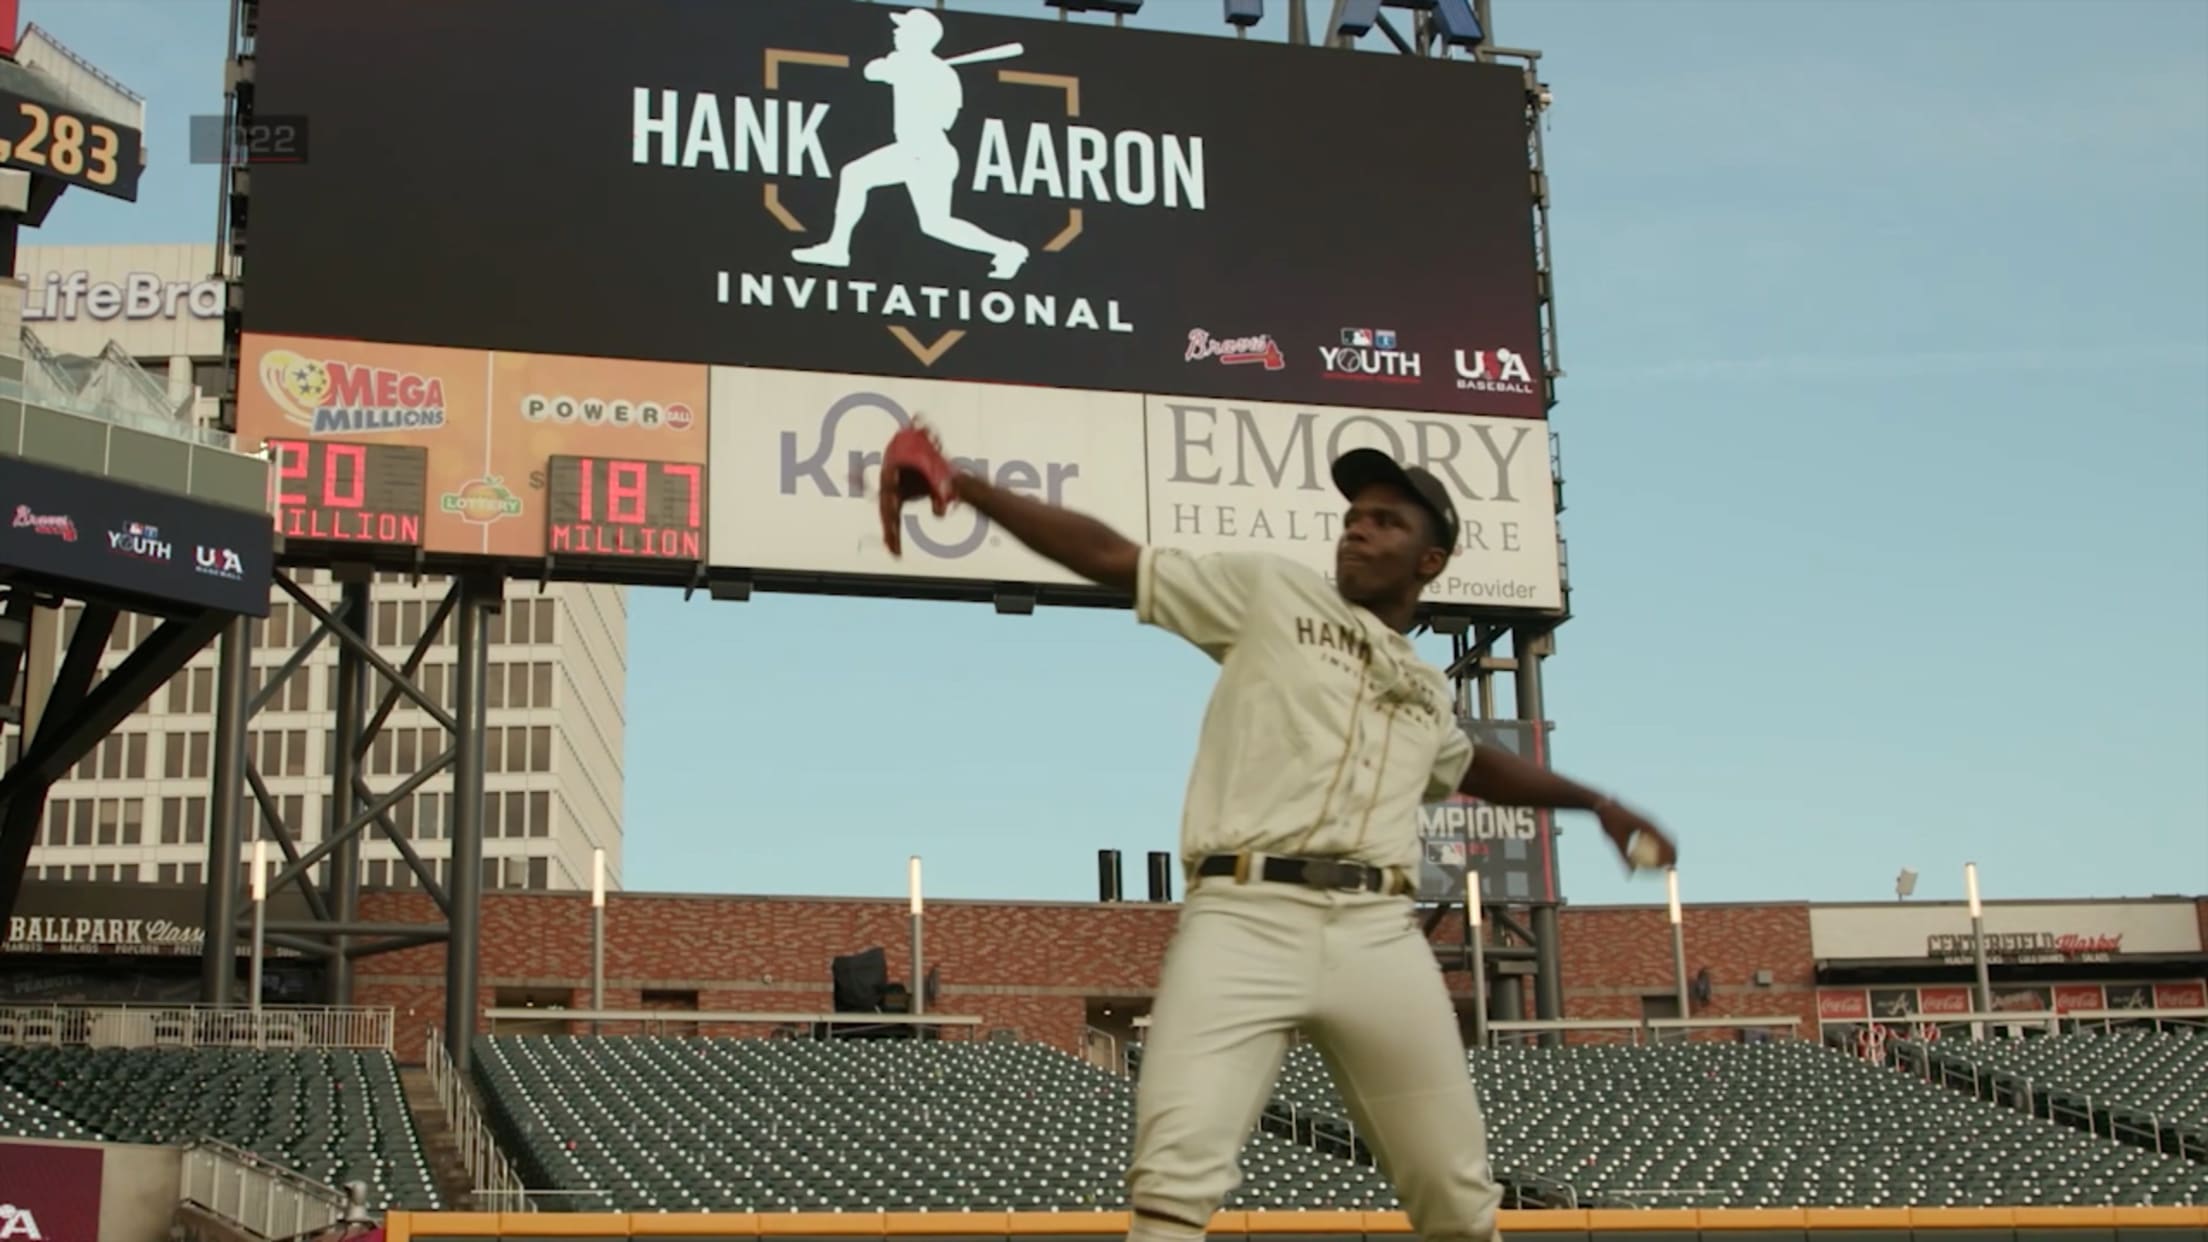 Hank Aaron Invitational developing players of all backgrounds 